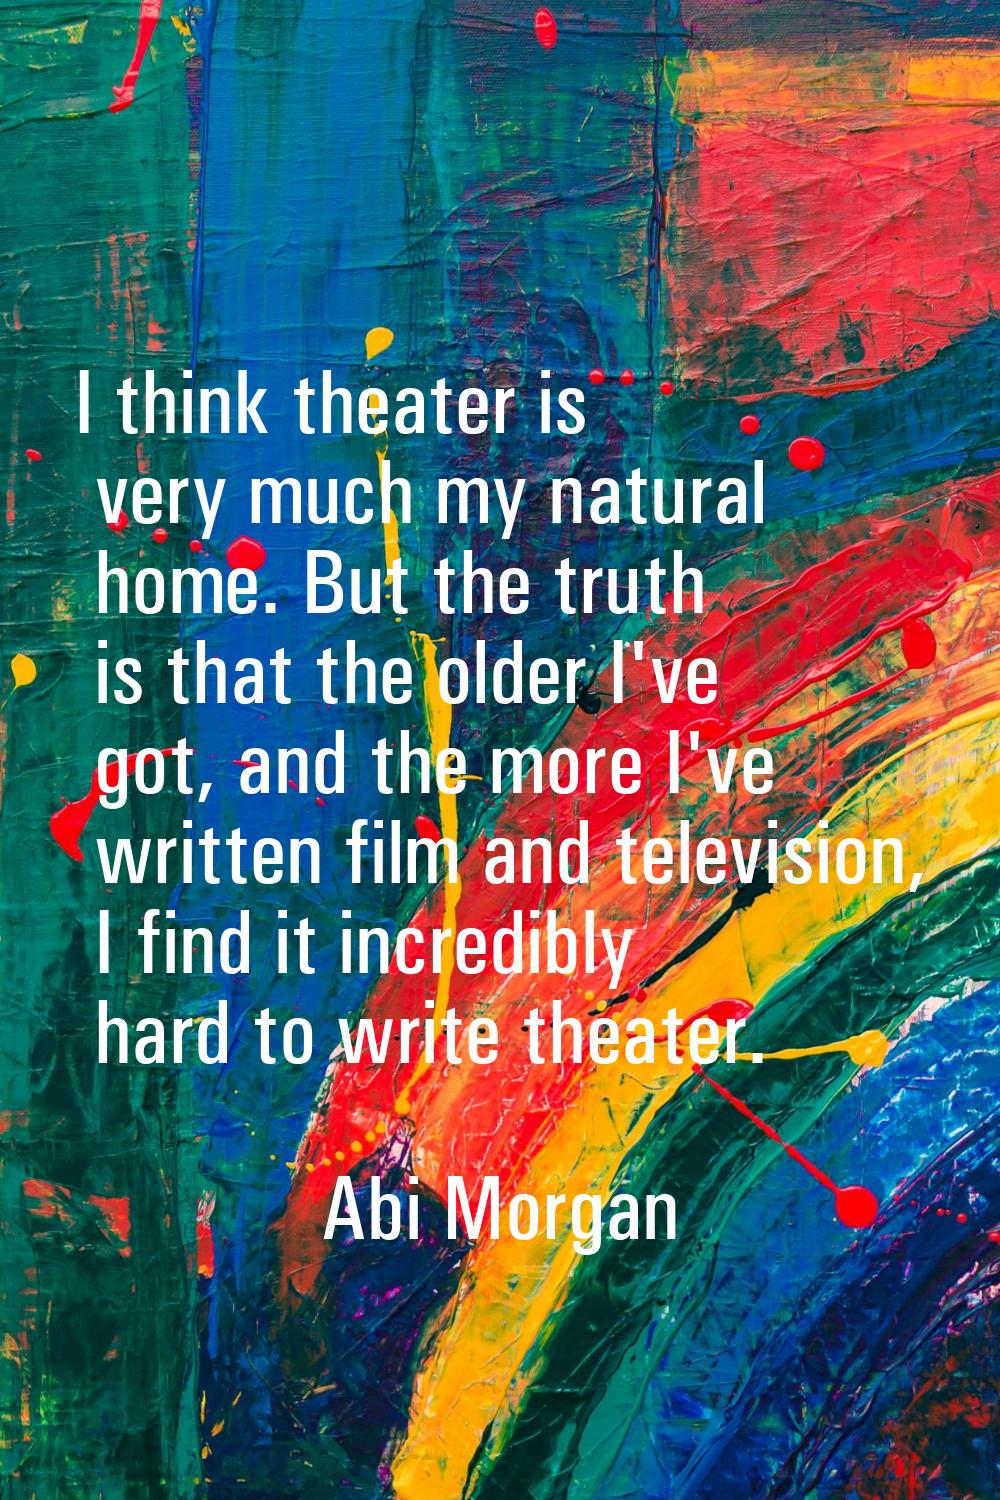 I think theater is very much my natural home. But the truth is that the older I've got, and the mor